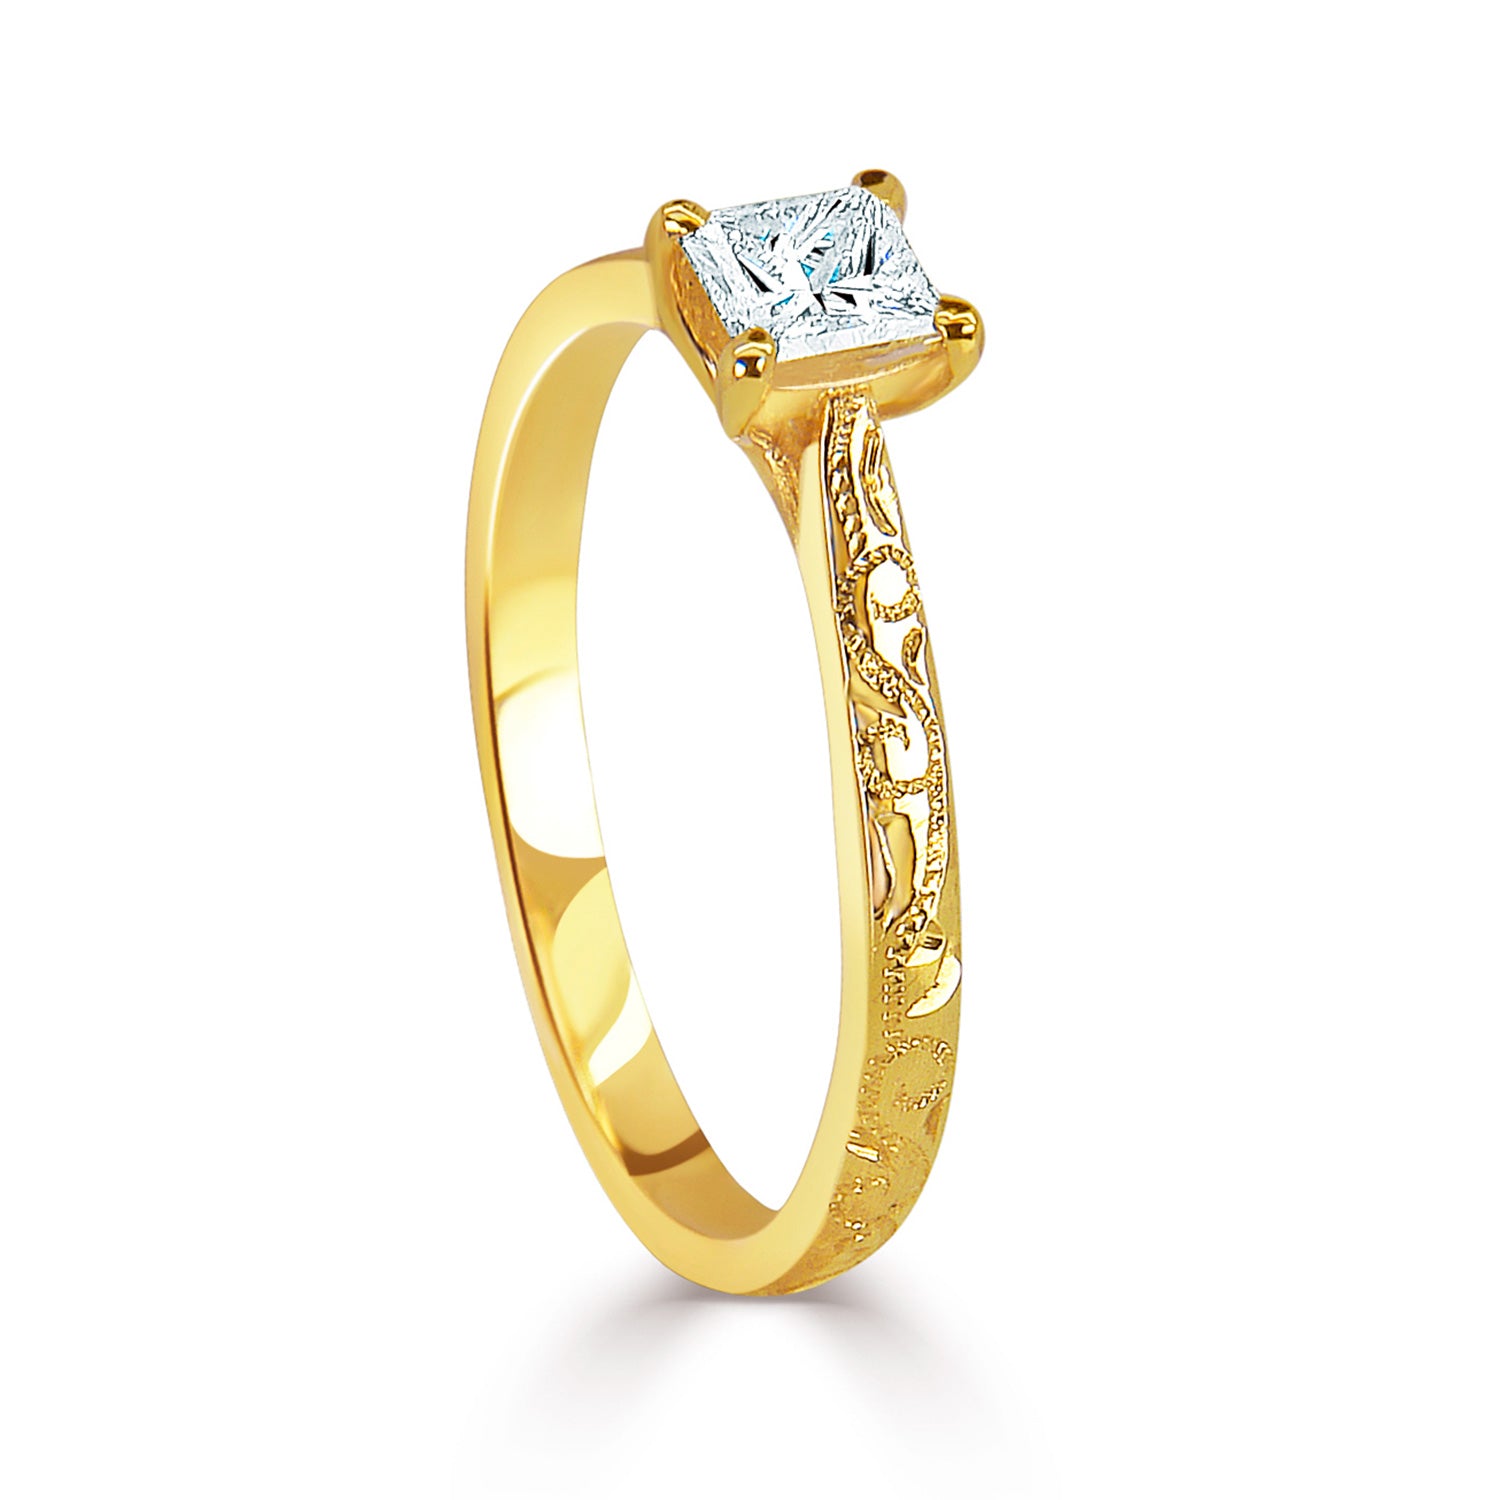 Bespoke engagement ring with hand-engraved Fairtrade Gold band and a princess-cut Canadian diamond